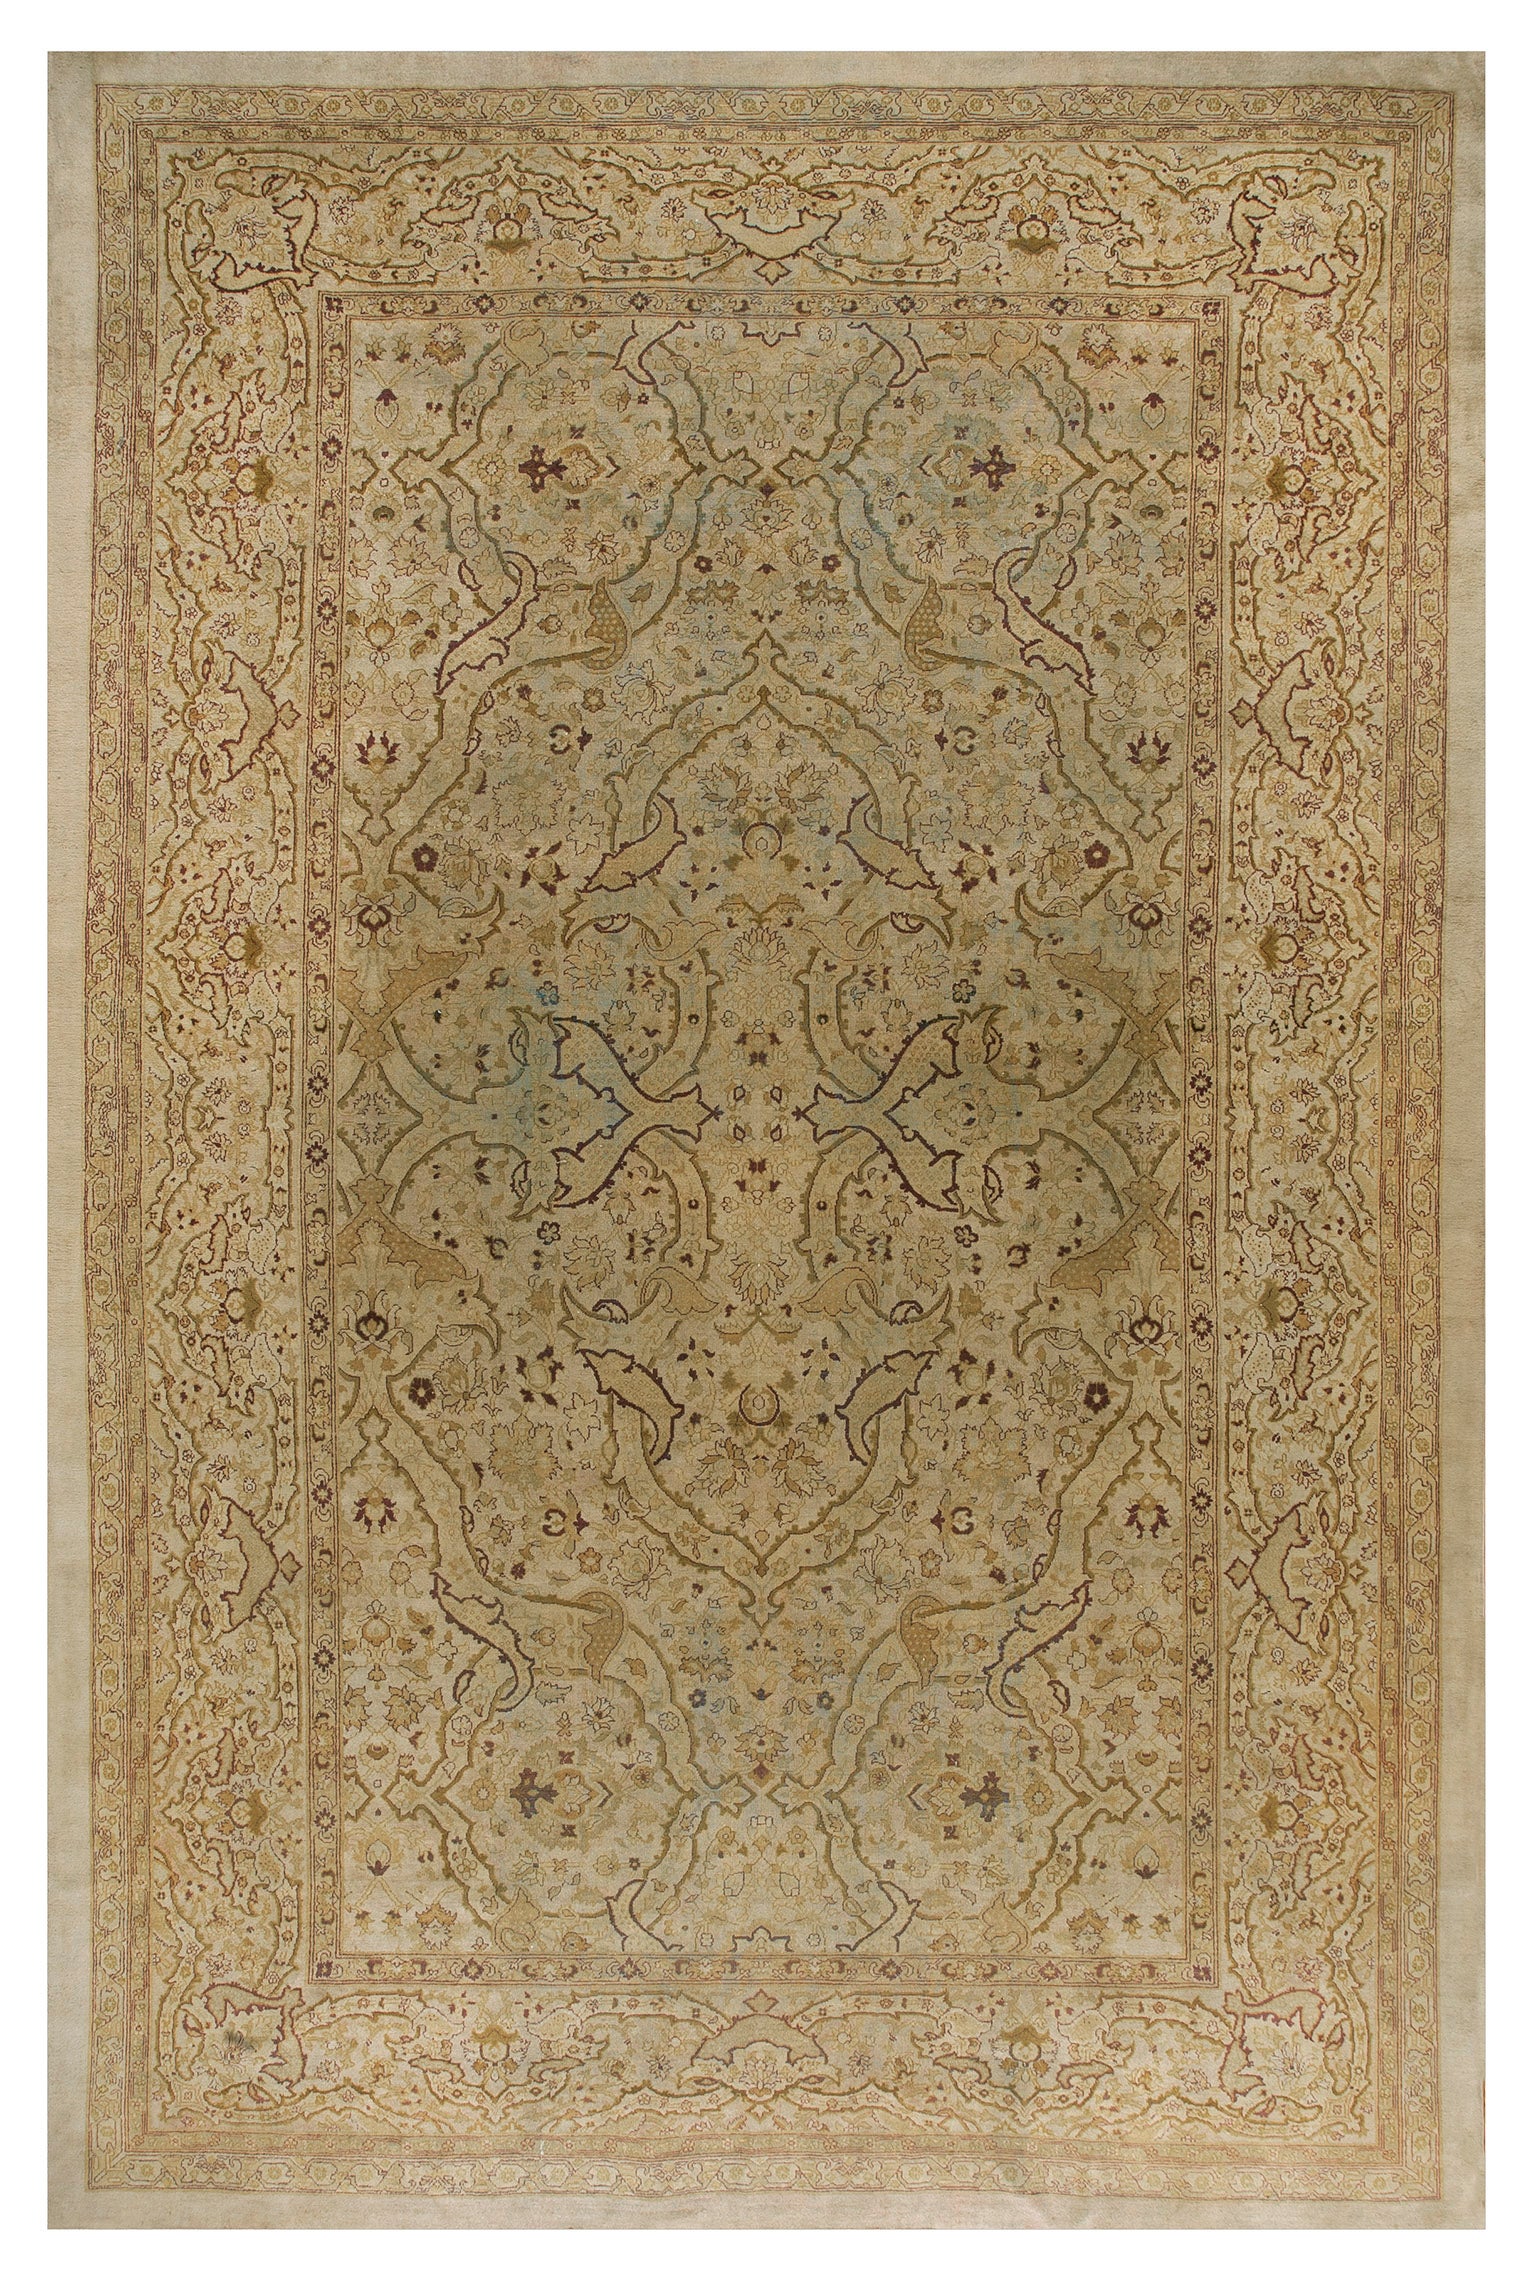 Late 19th Century Indian Amritsar Carpet ( 11' x 17' - 335 x 518 ) For Sale